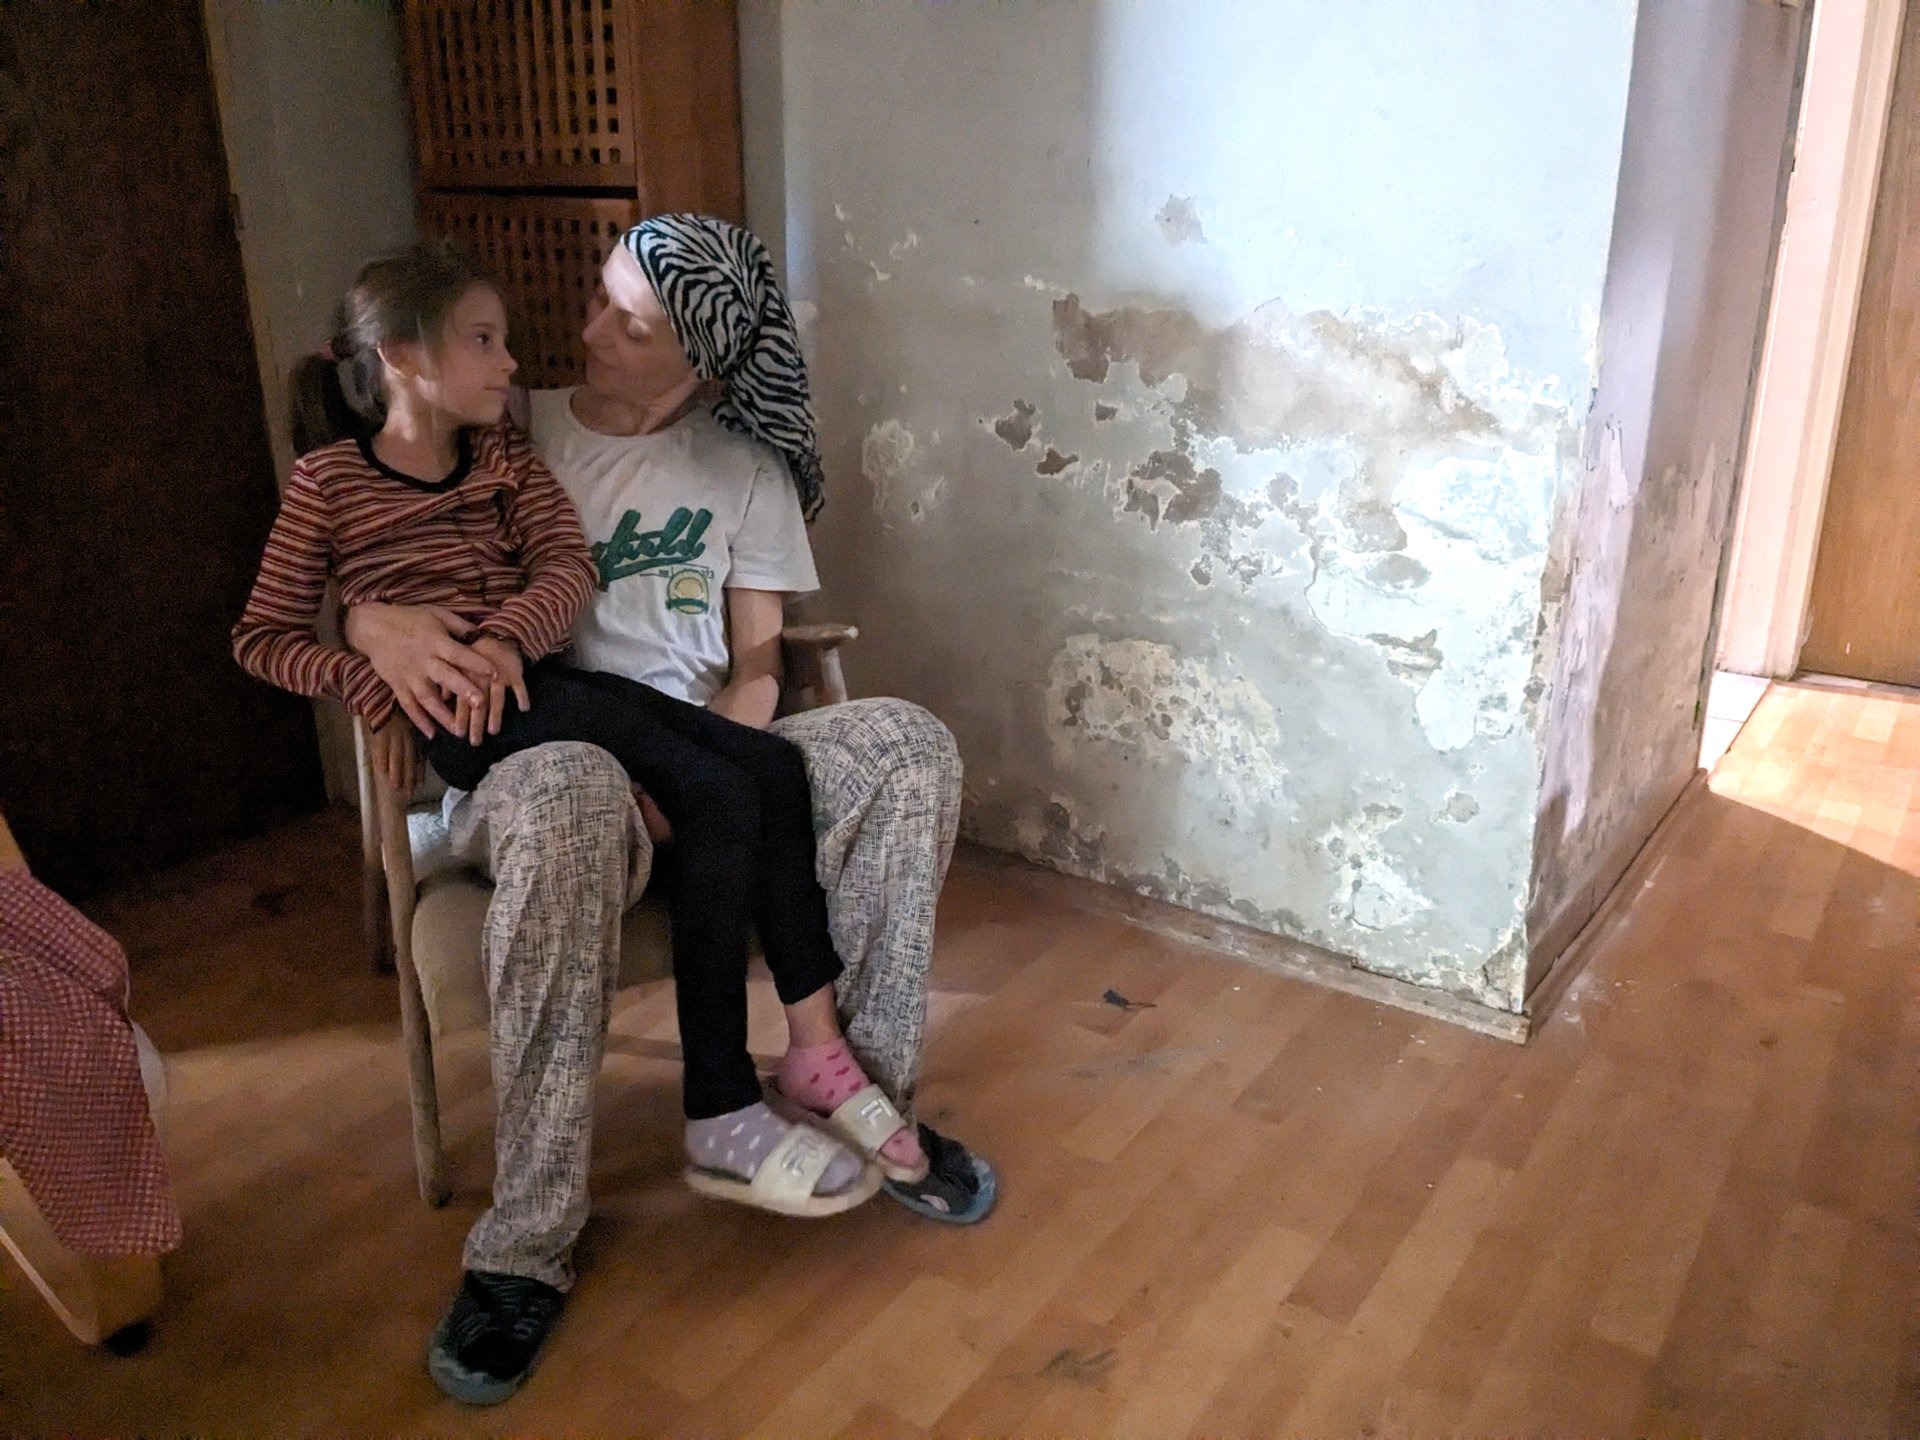 Maris with her mother, Iva, in their home in Bosnia and Herzegovina 